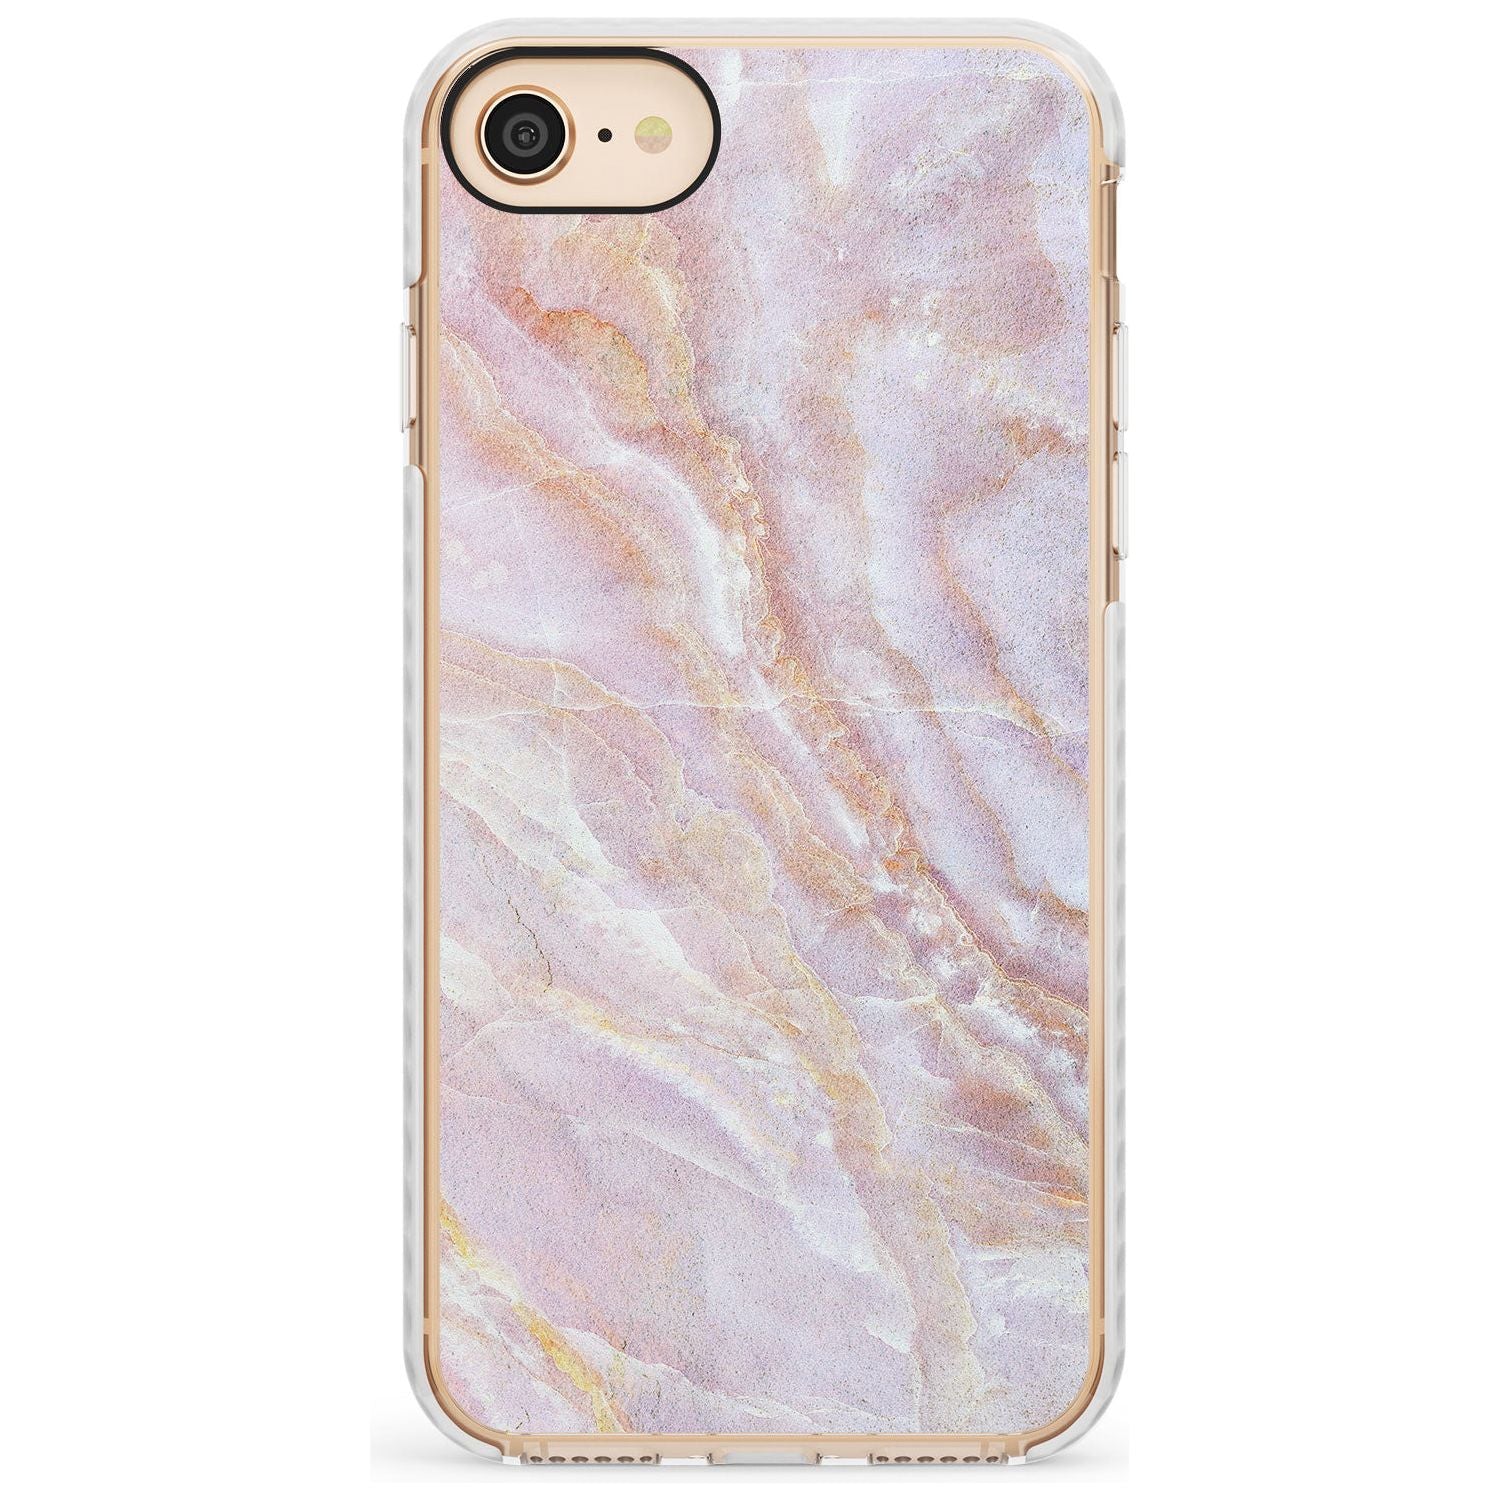 Soft Pink & Yellow Onyx Marble Texture Slim TPU Phone Case for iPhone SE 8 7 Plus